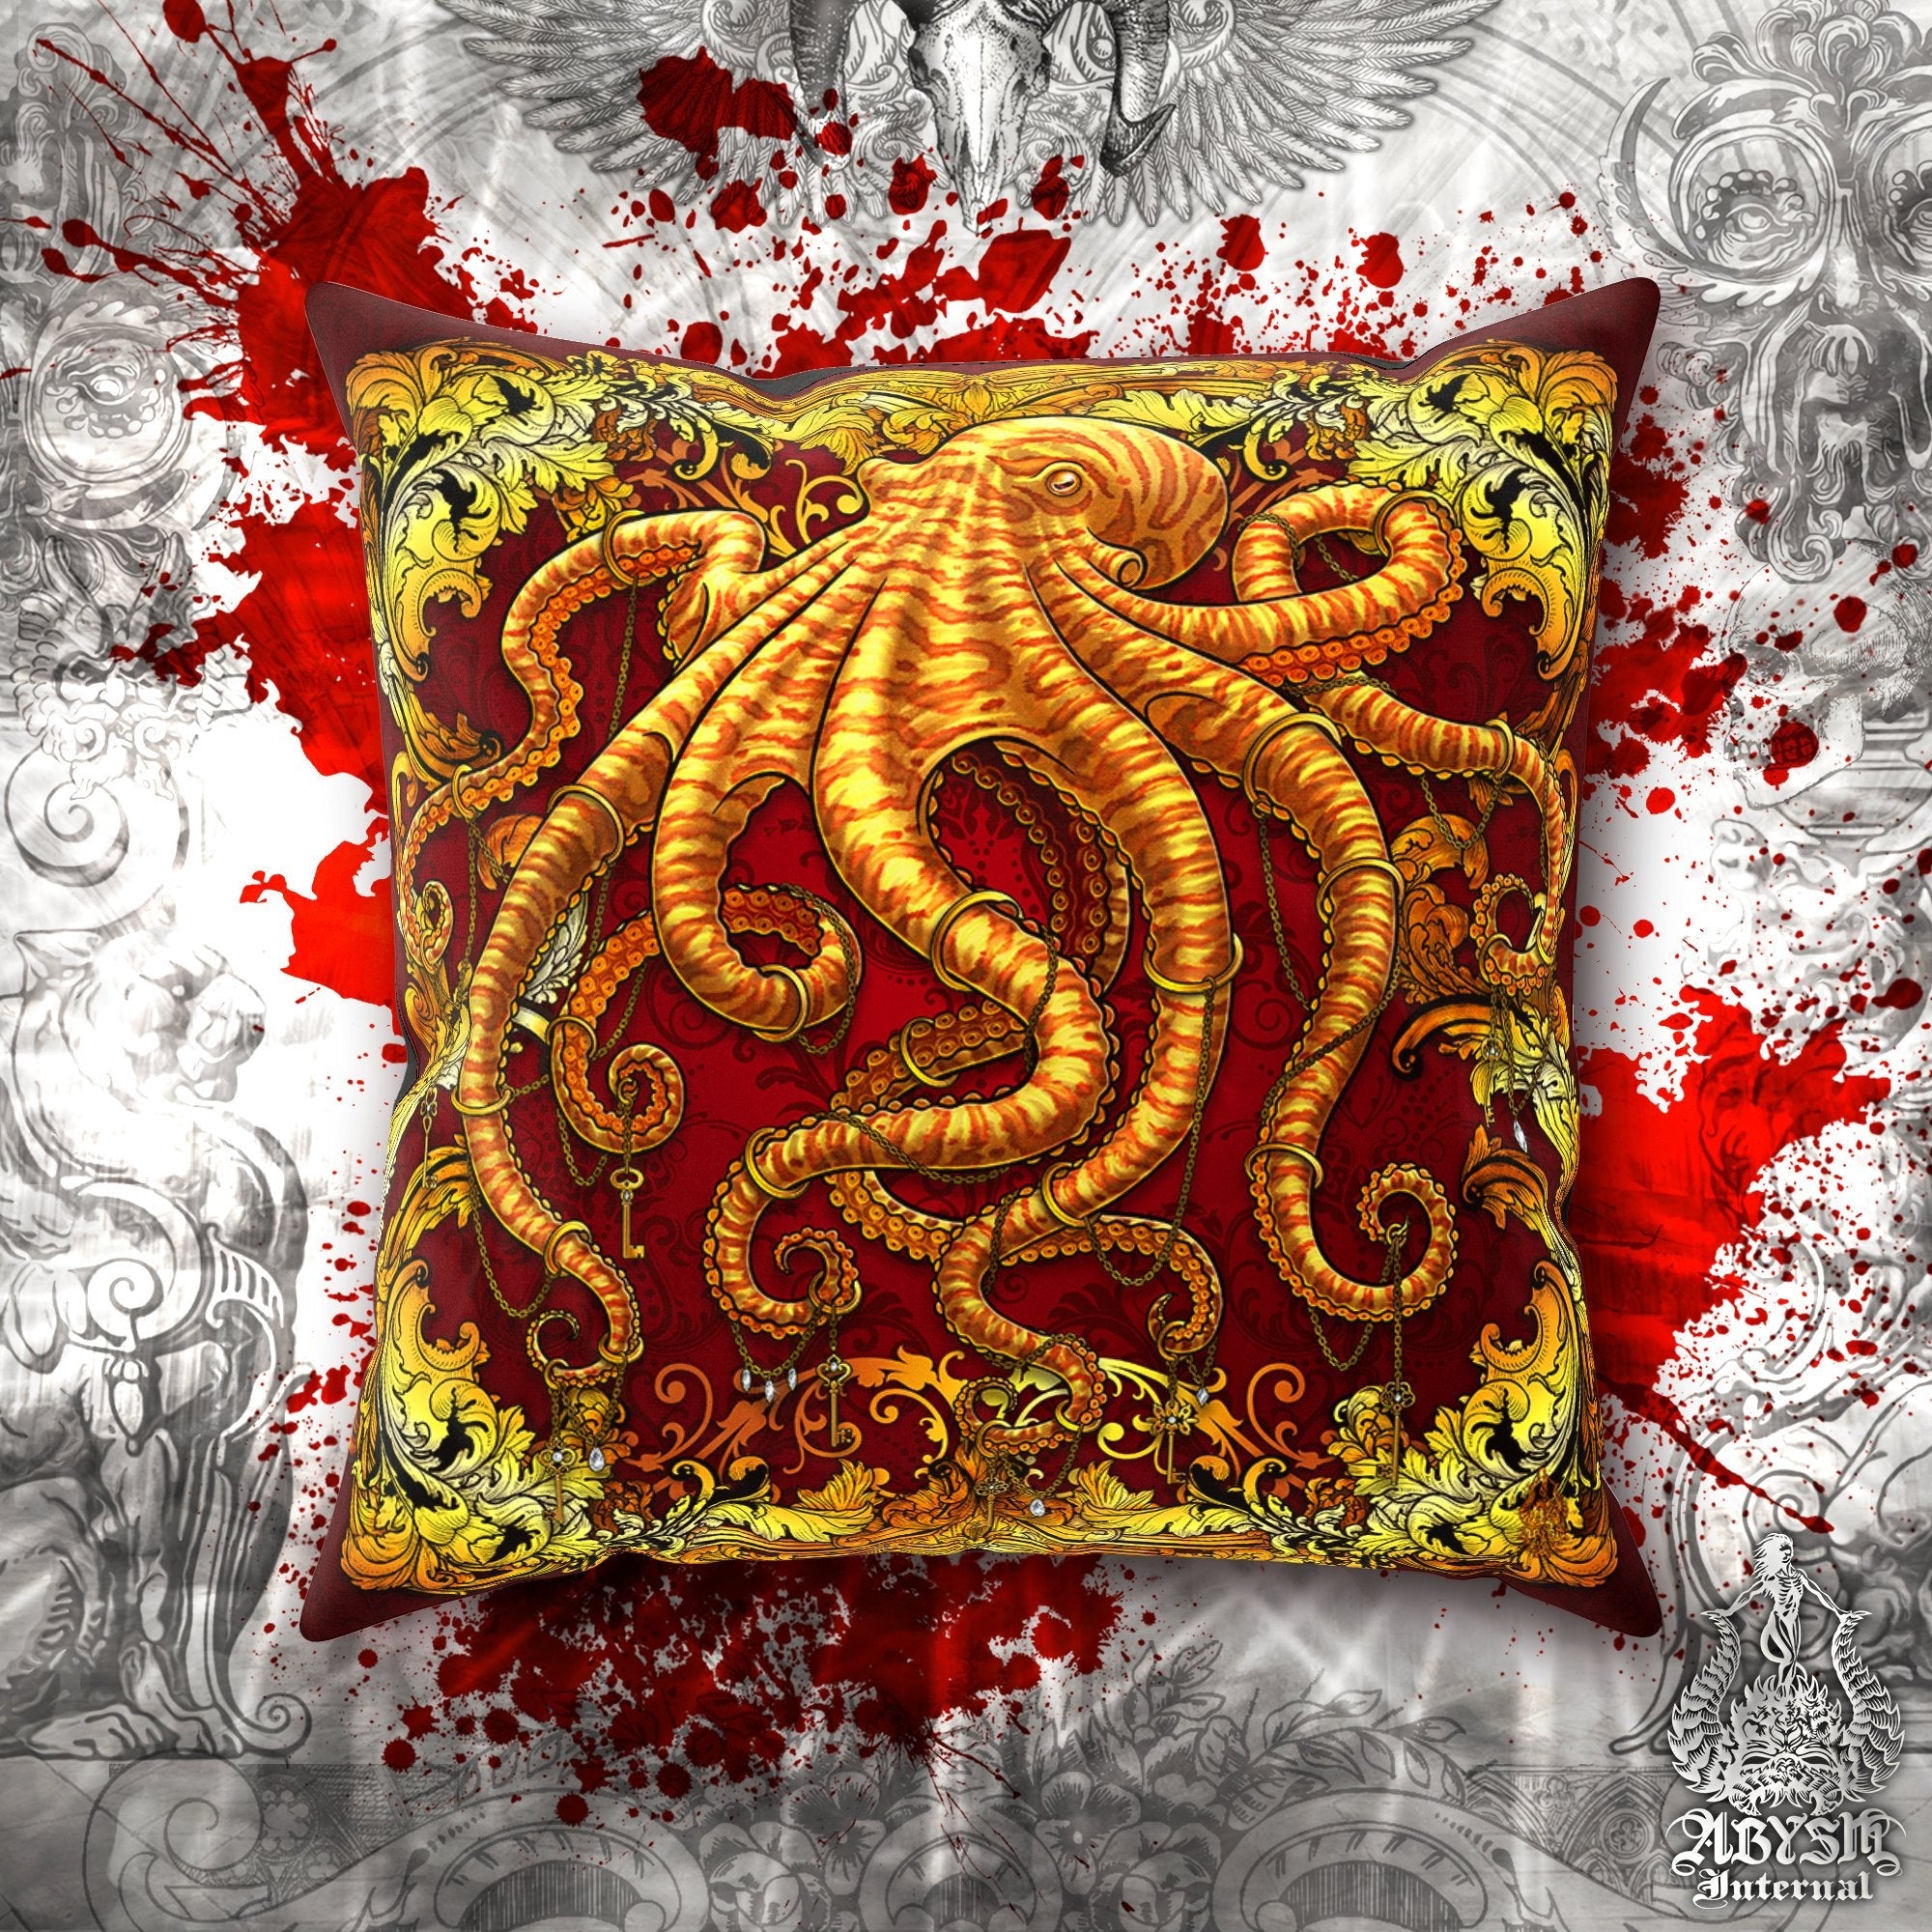 Octopus Throw Pillow, Decorative Accent Cushion, Beach Room Decor, Indie and Eclectic Design, Alternative Home - Gold & Red - Abysm Internal